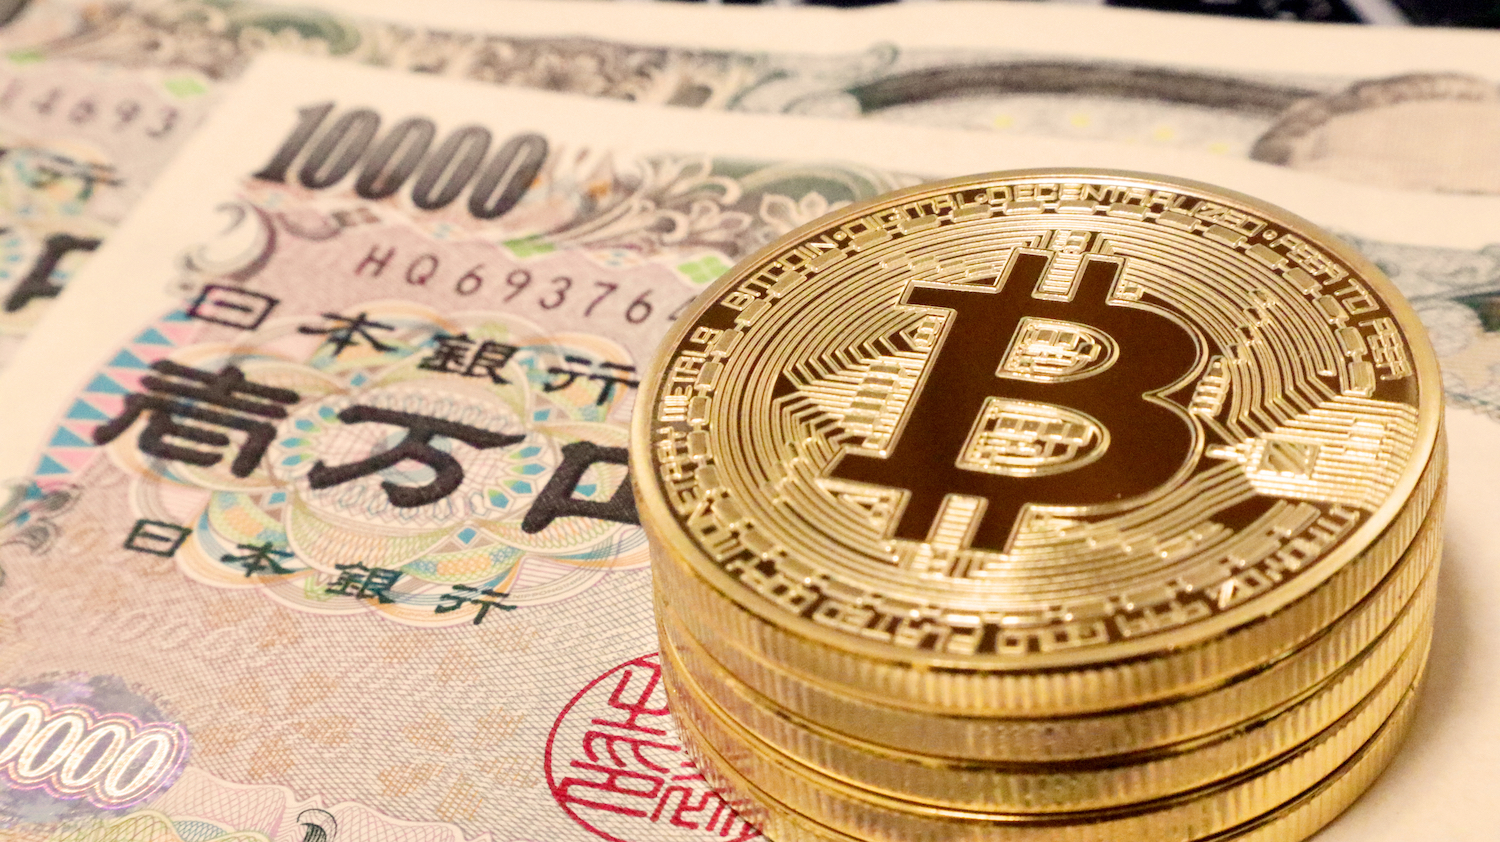 Suspect Crypto Transactions Rise In Japan But Still Just 1.7% Of Total